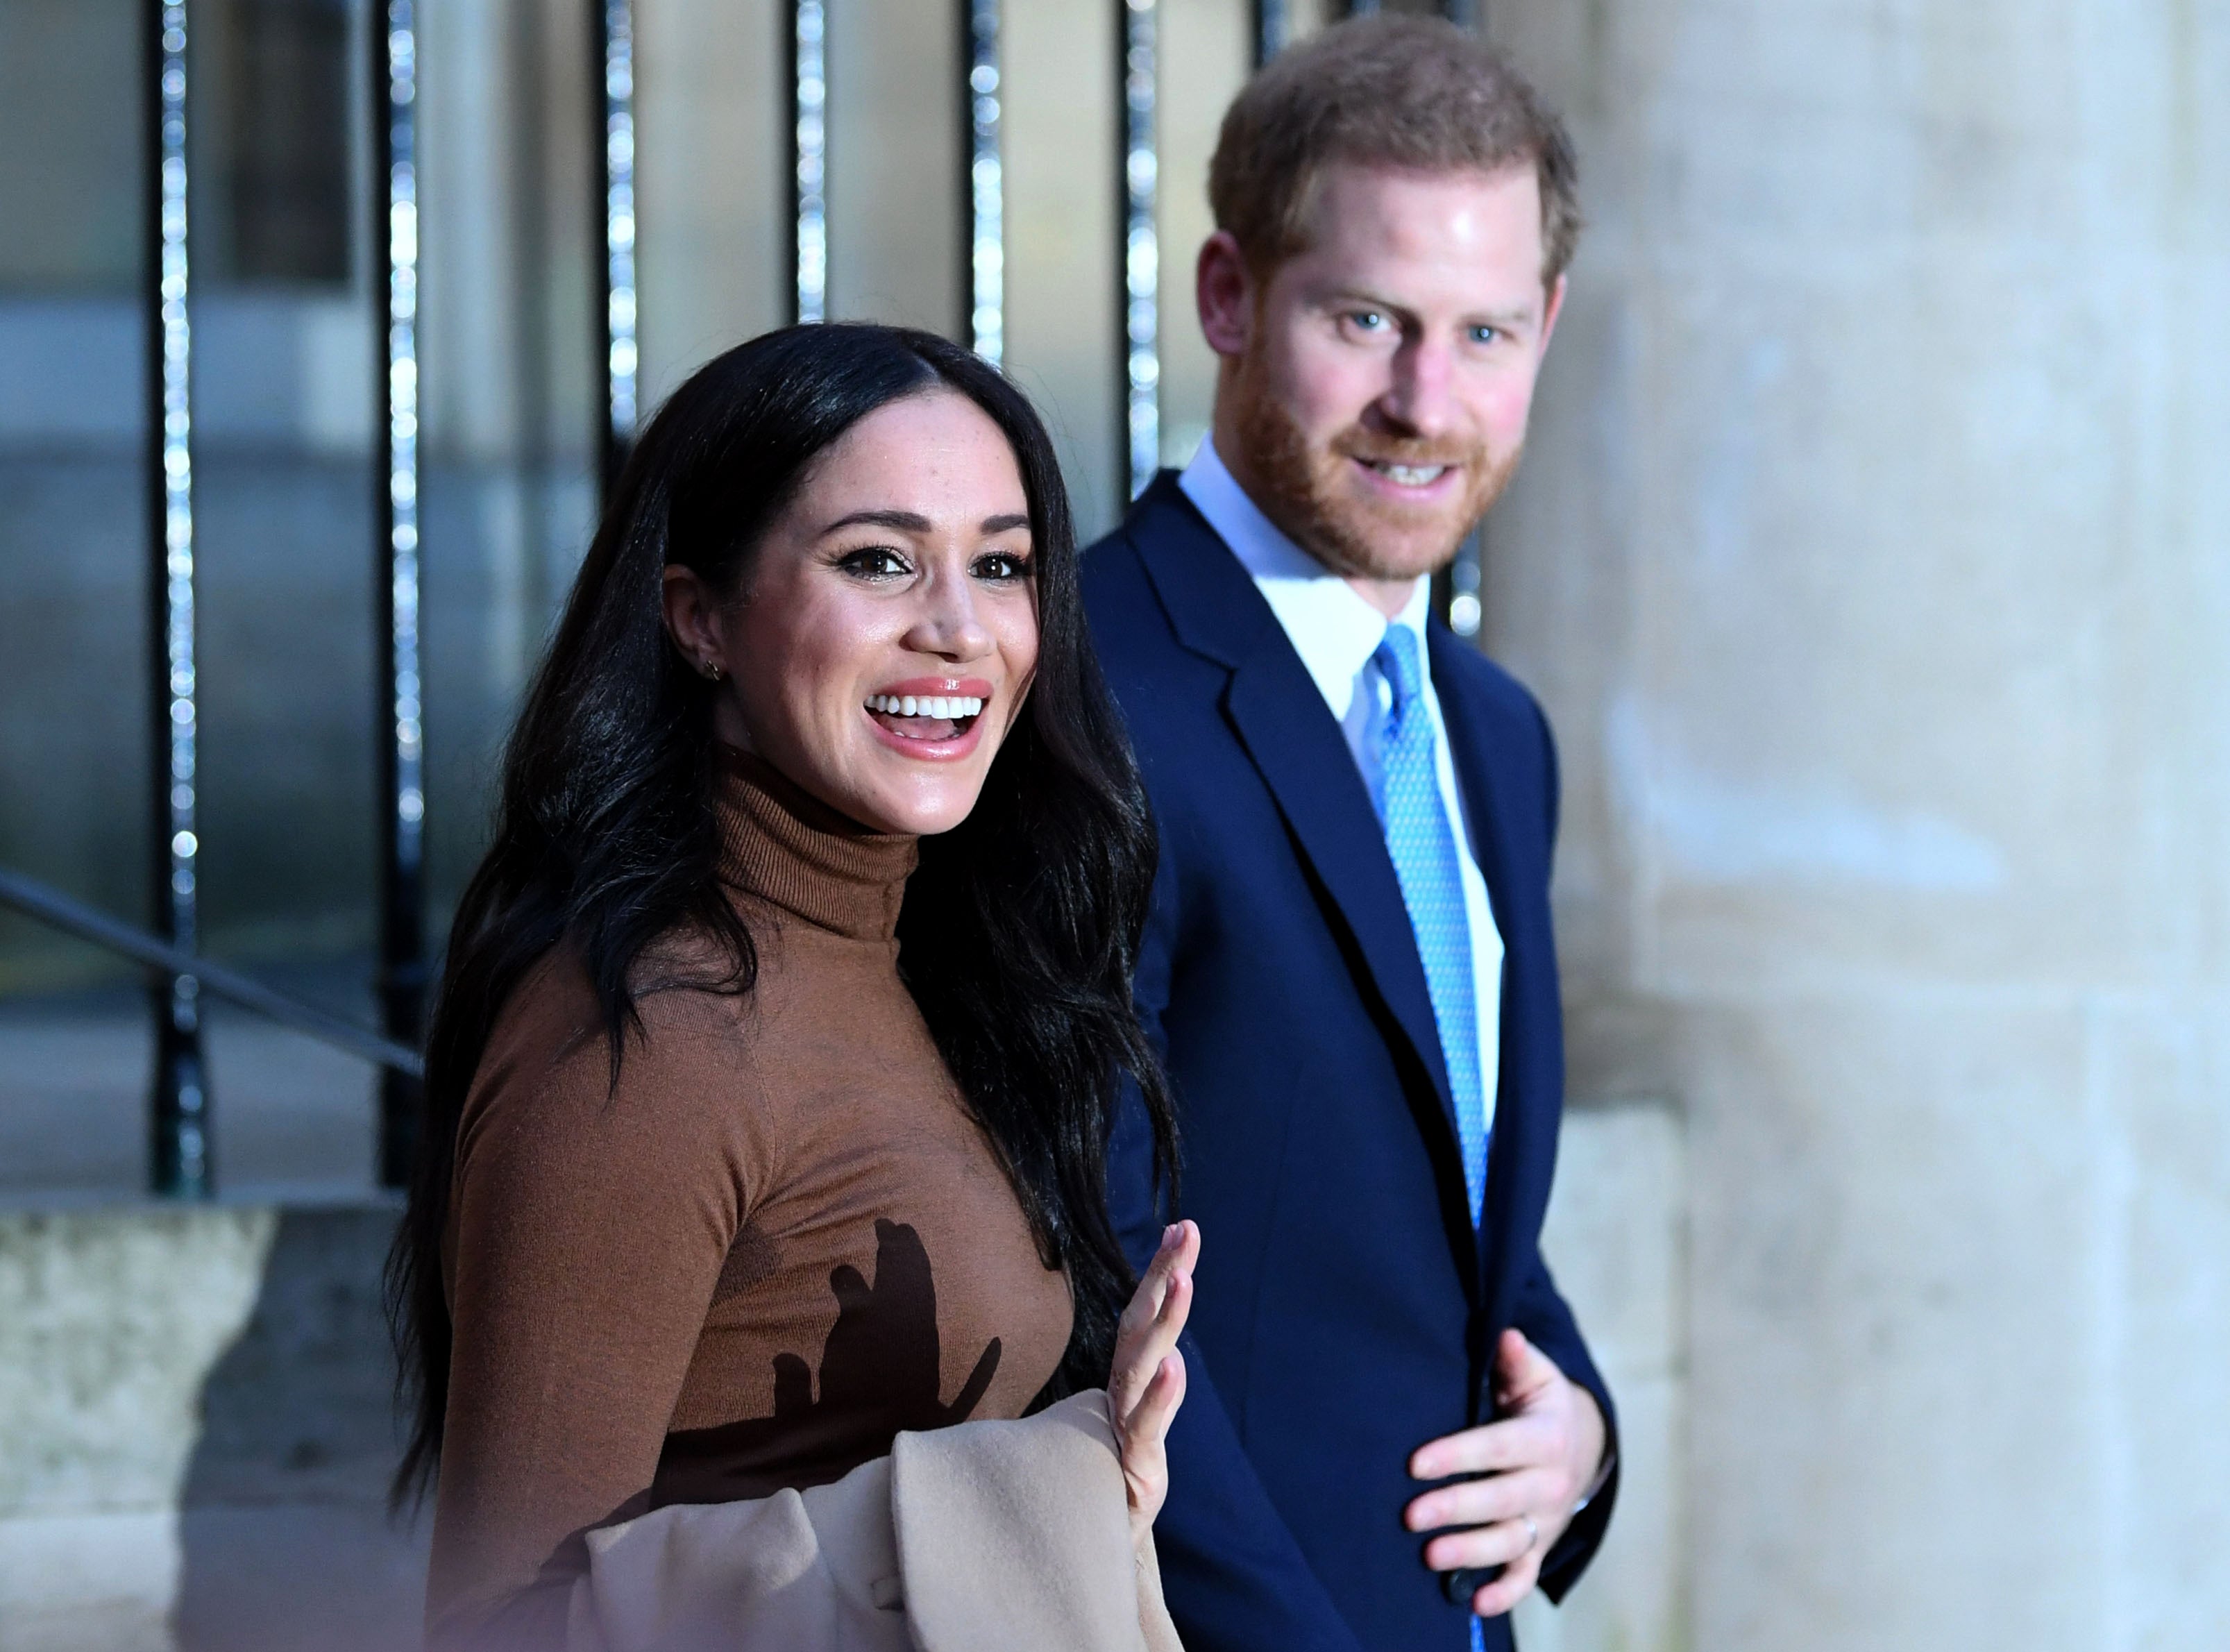 The Duke and Duchess of Sussex in London in 2020 (Daniel Leal-Olivas/PA)